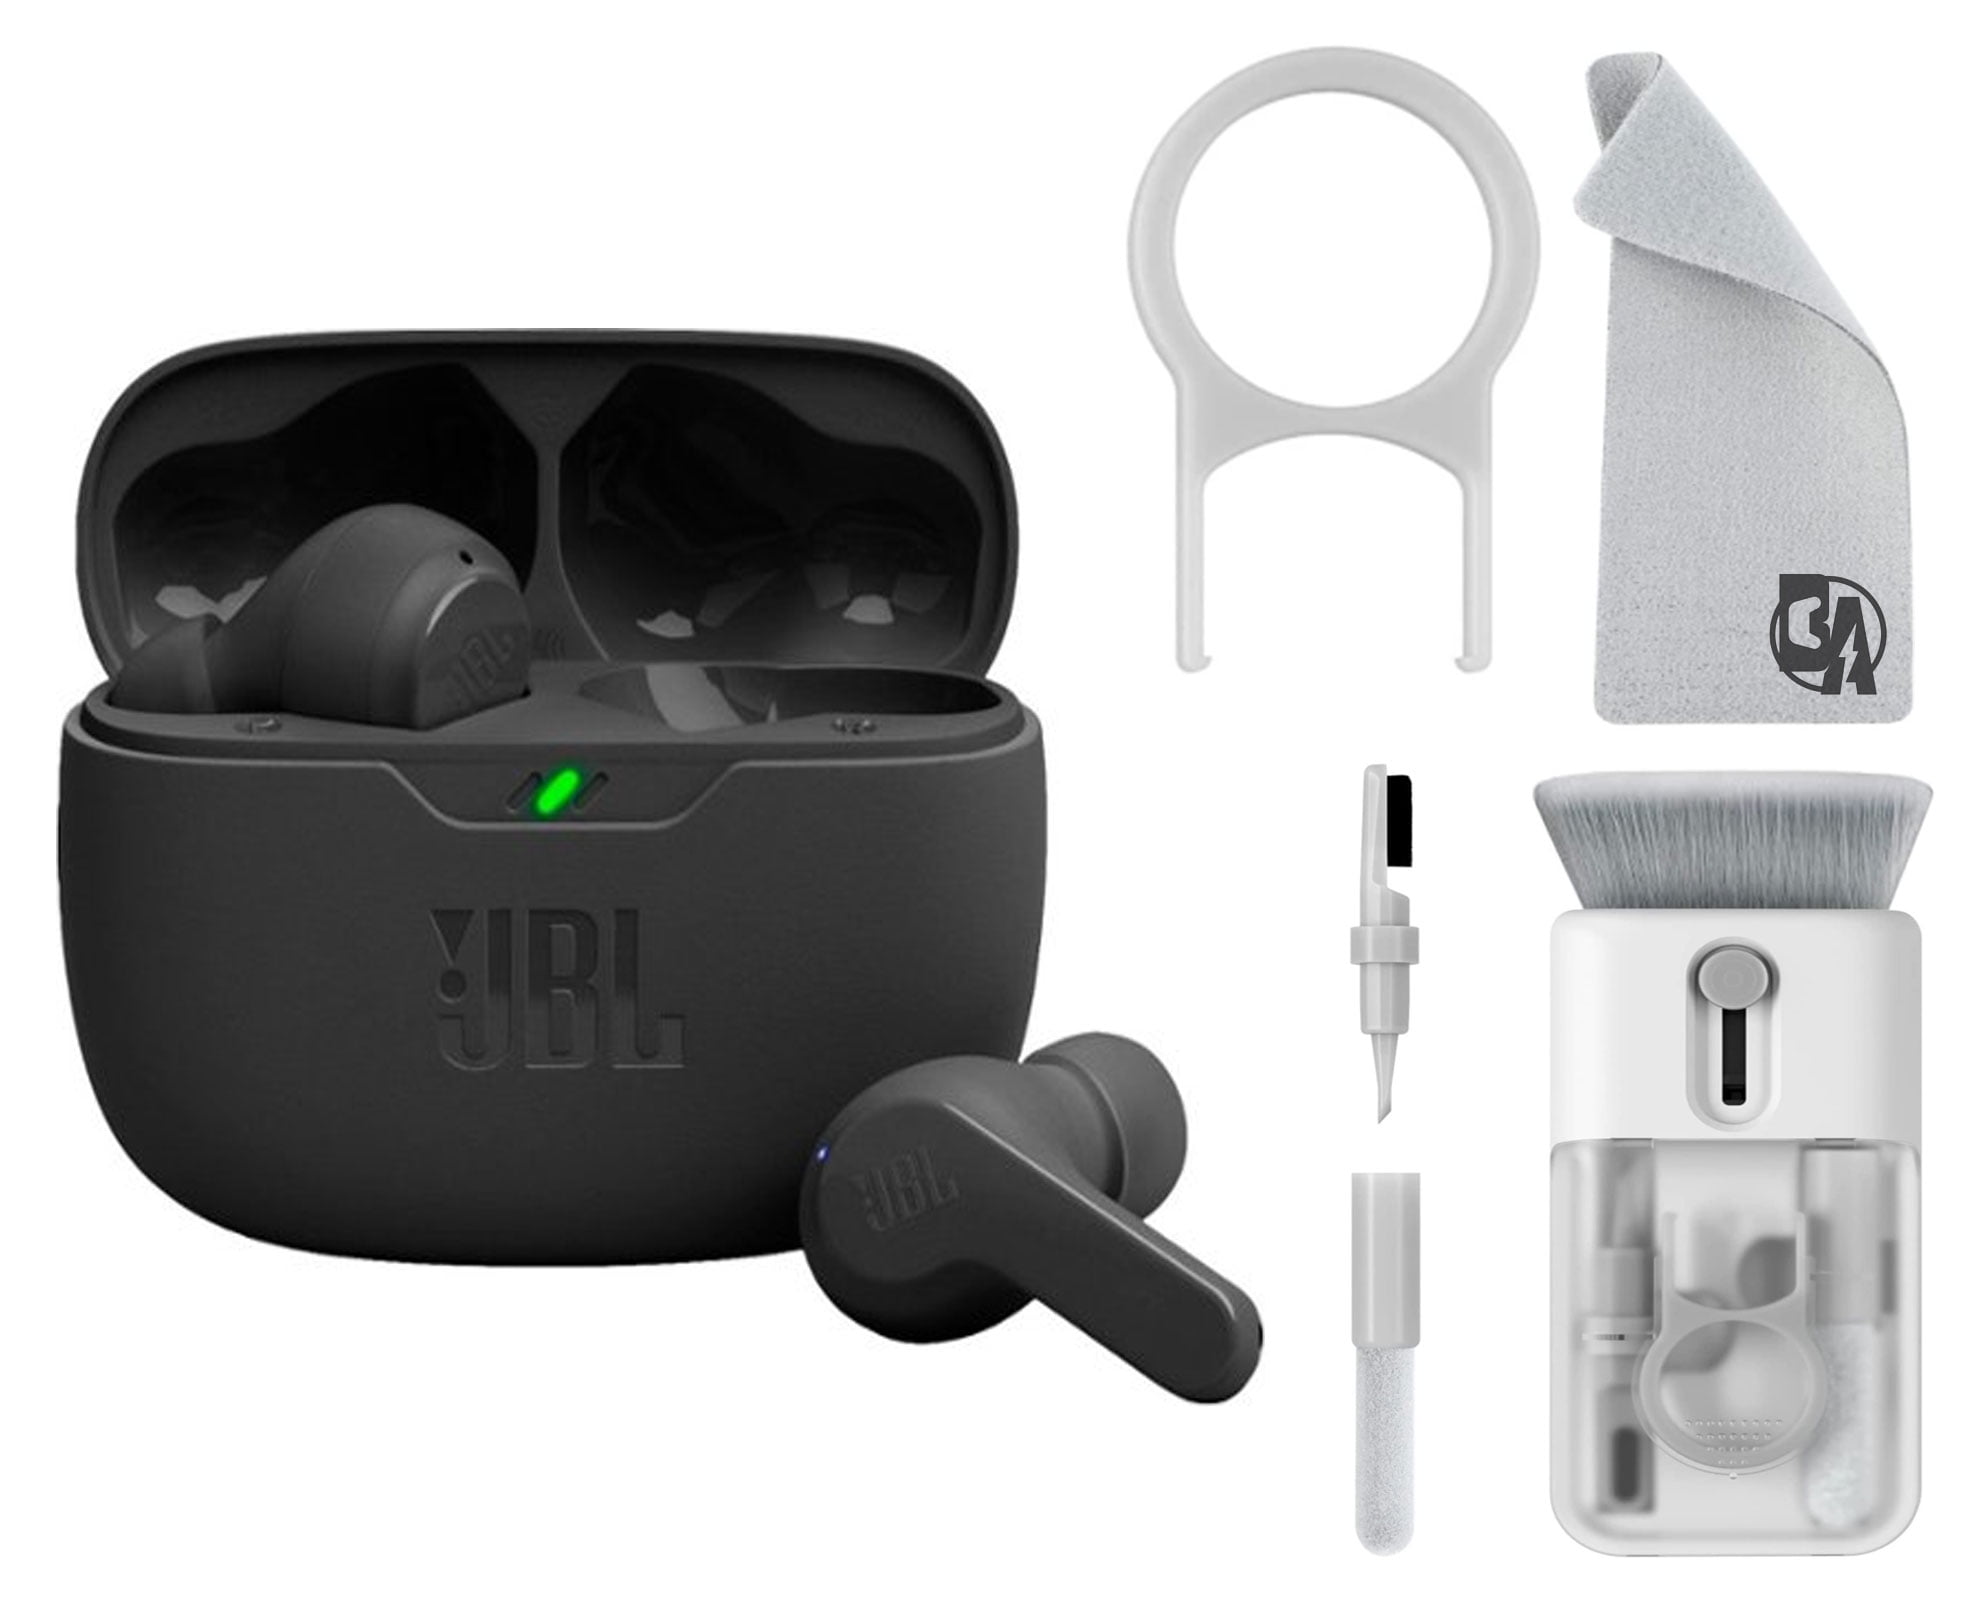 Vibe Beam True Wireless JBL Earbuds Black With Cleaning Kit BOLT AXTION Used - Walmart.com